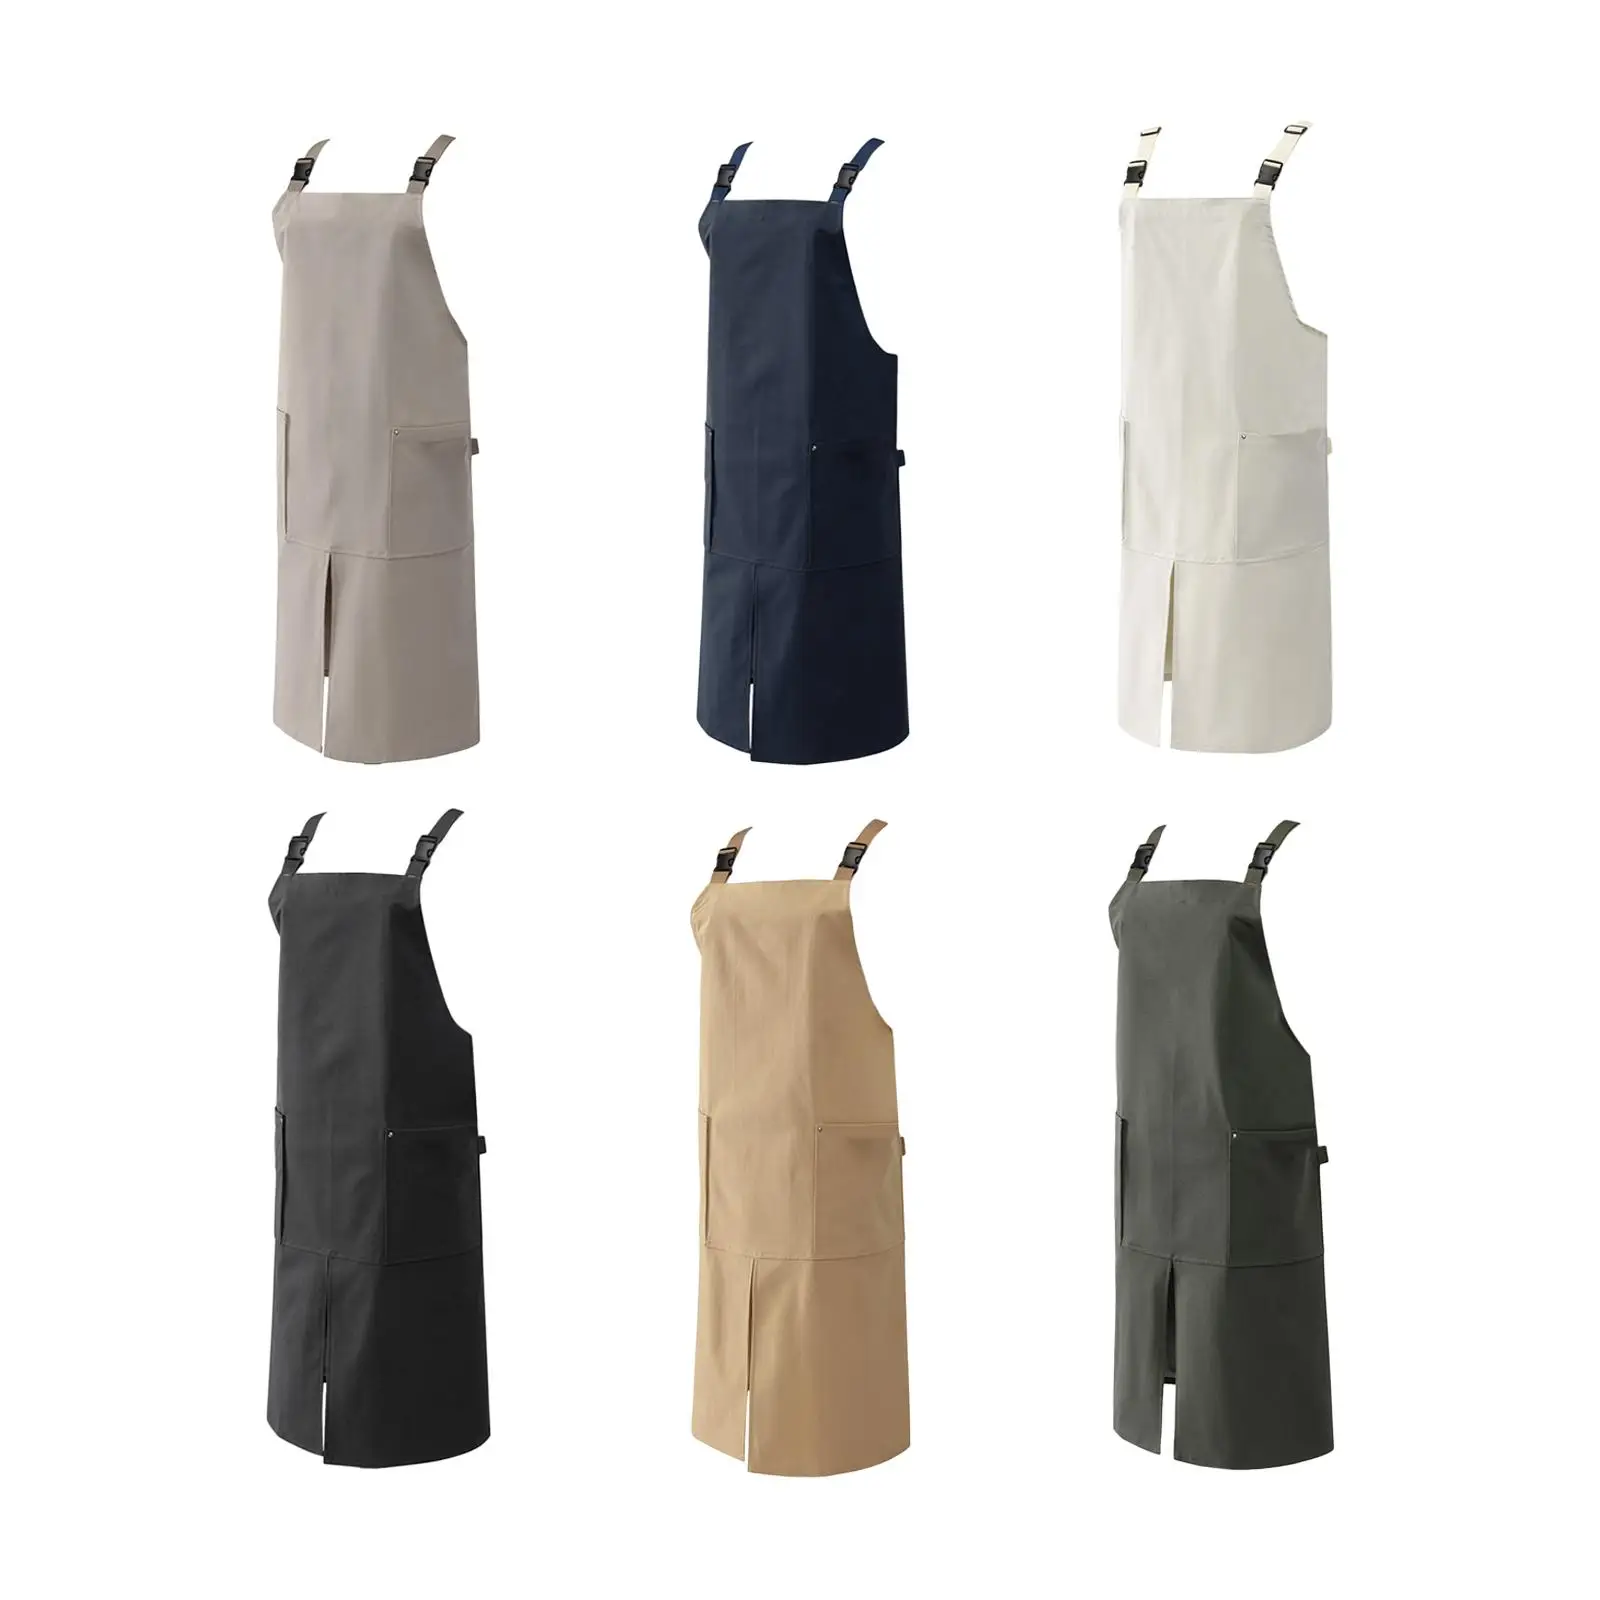 Kitchen Cooking Baking Apron Coffee Restaurant Work Clothes Unisex Canvas Apron for Hair Stylist Painting Hairdressers Uniform